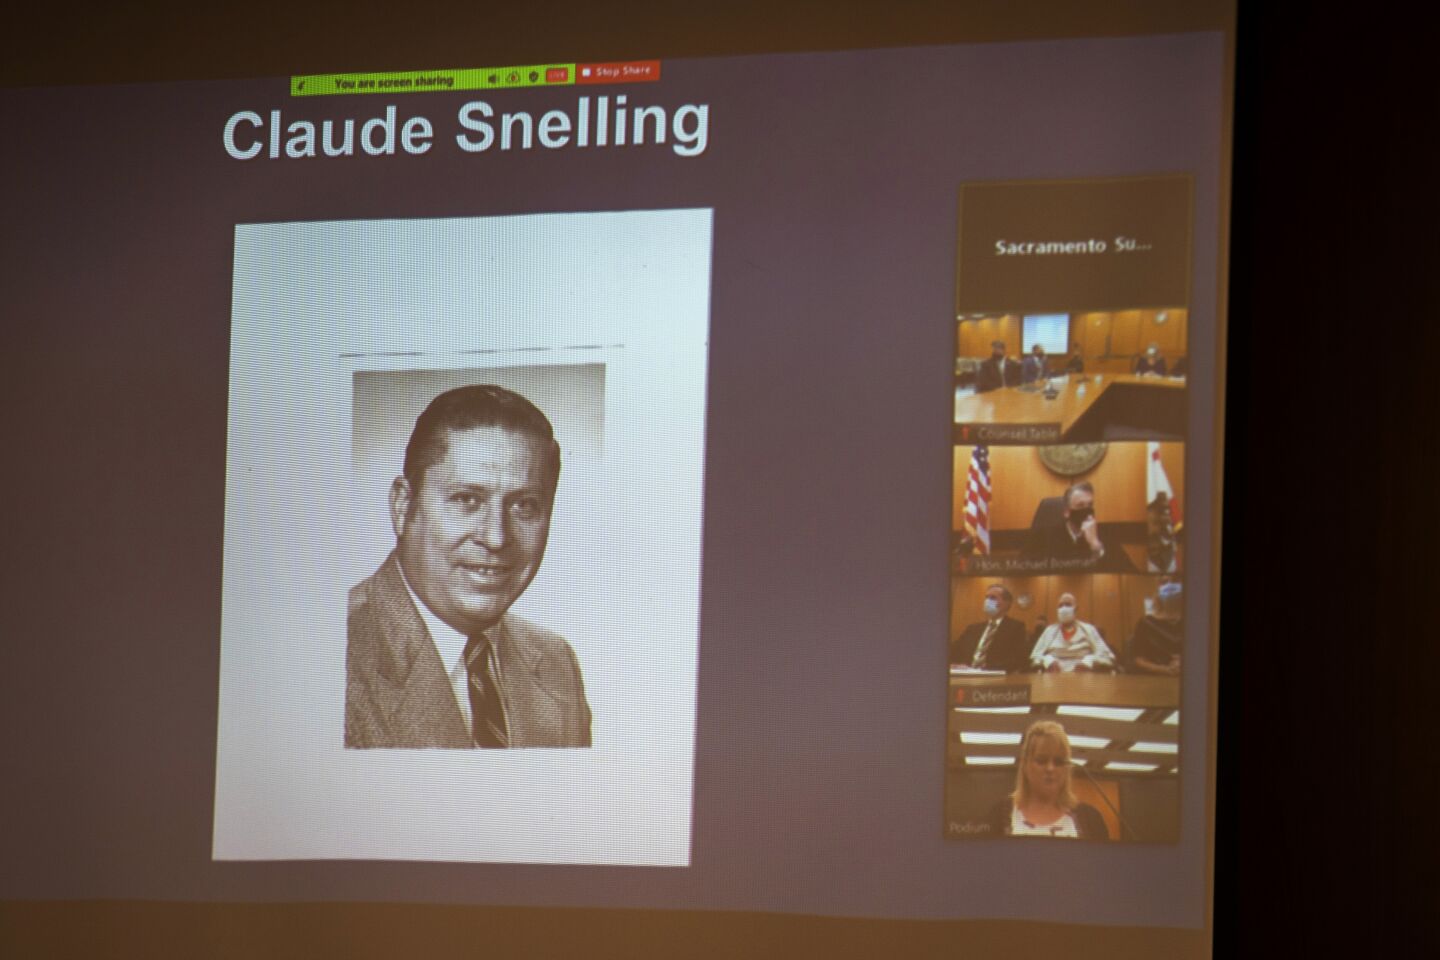 A photo of Claude Snelling is projected onto a screen in a courtroom.